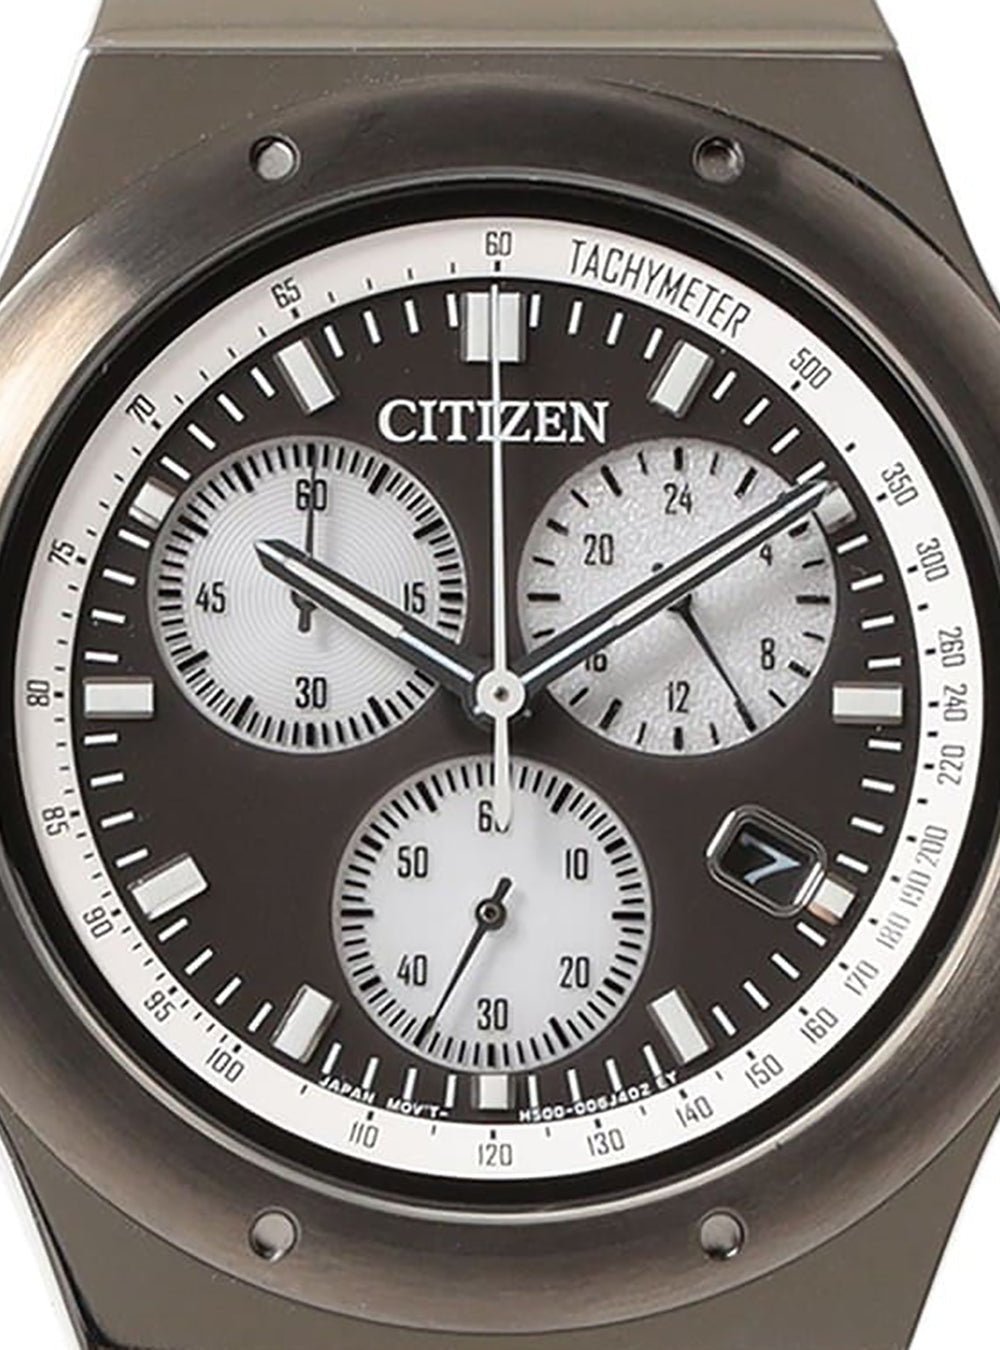 CITIZEN × BEAMS RECORD LABEL 1984 CHRONOGRAPH LIMITED EDITION JAPAN MOV'T JDMWRISTWATCHjapan-select